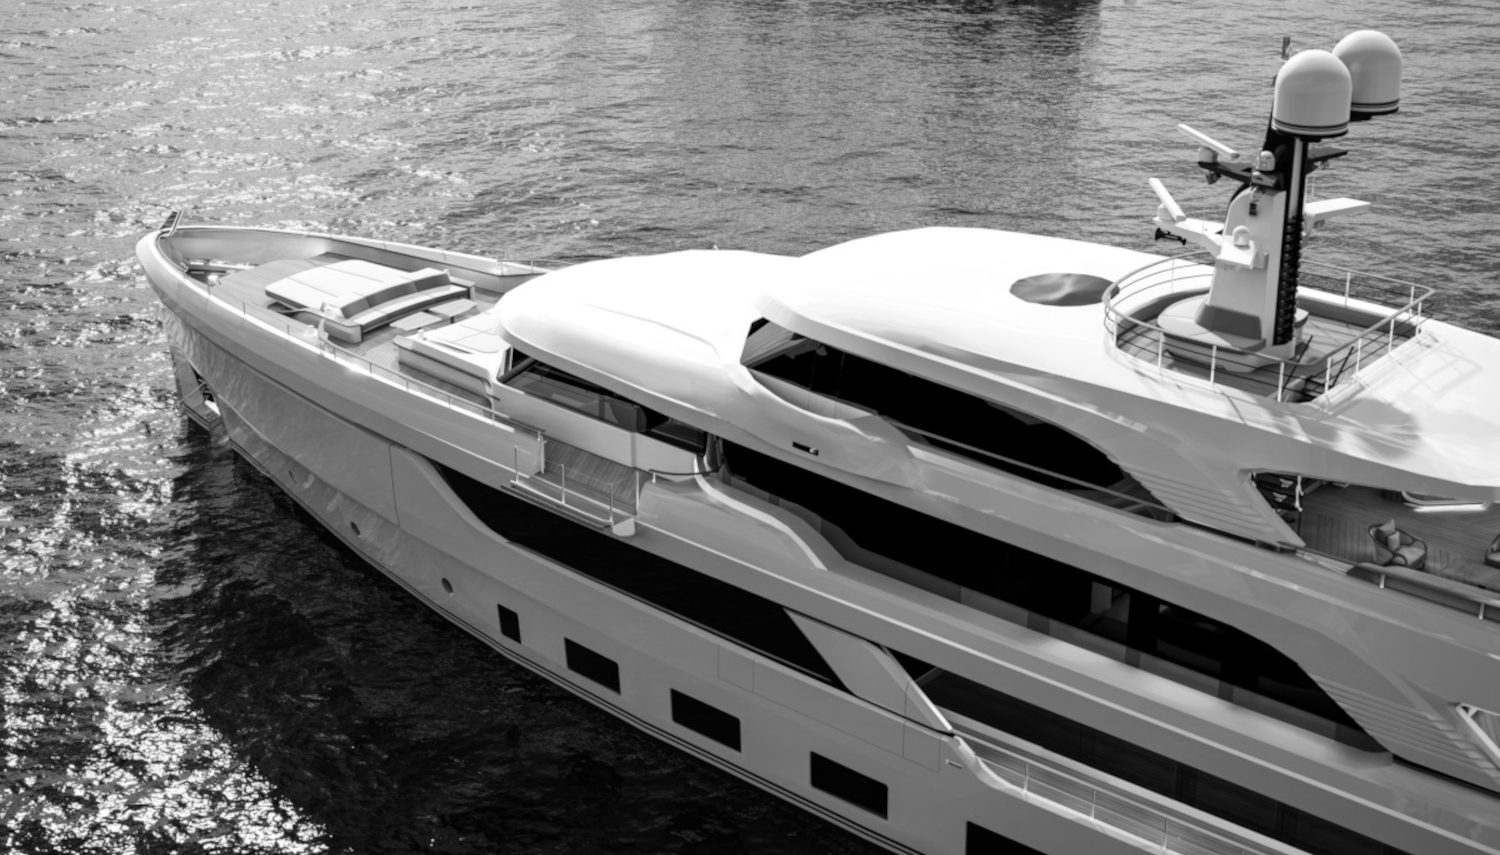 SF60 - Vripack Design - Rendering Black & White - Go Anywhere Yacht - Alia Yachts - SF Yachts - High Performance Expedition Yacht – Ice Class Hull